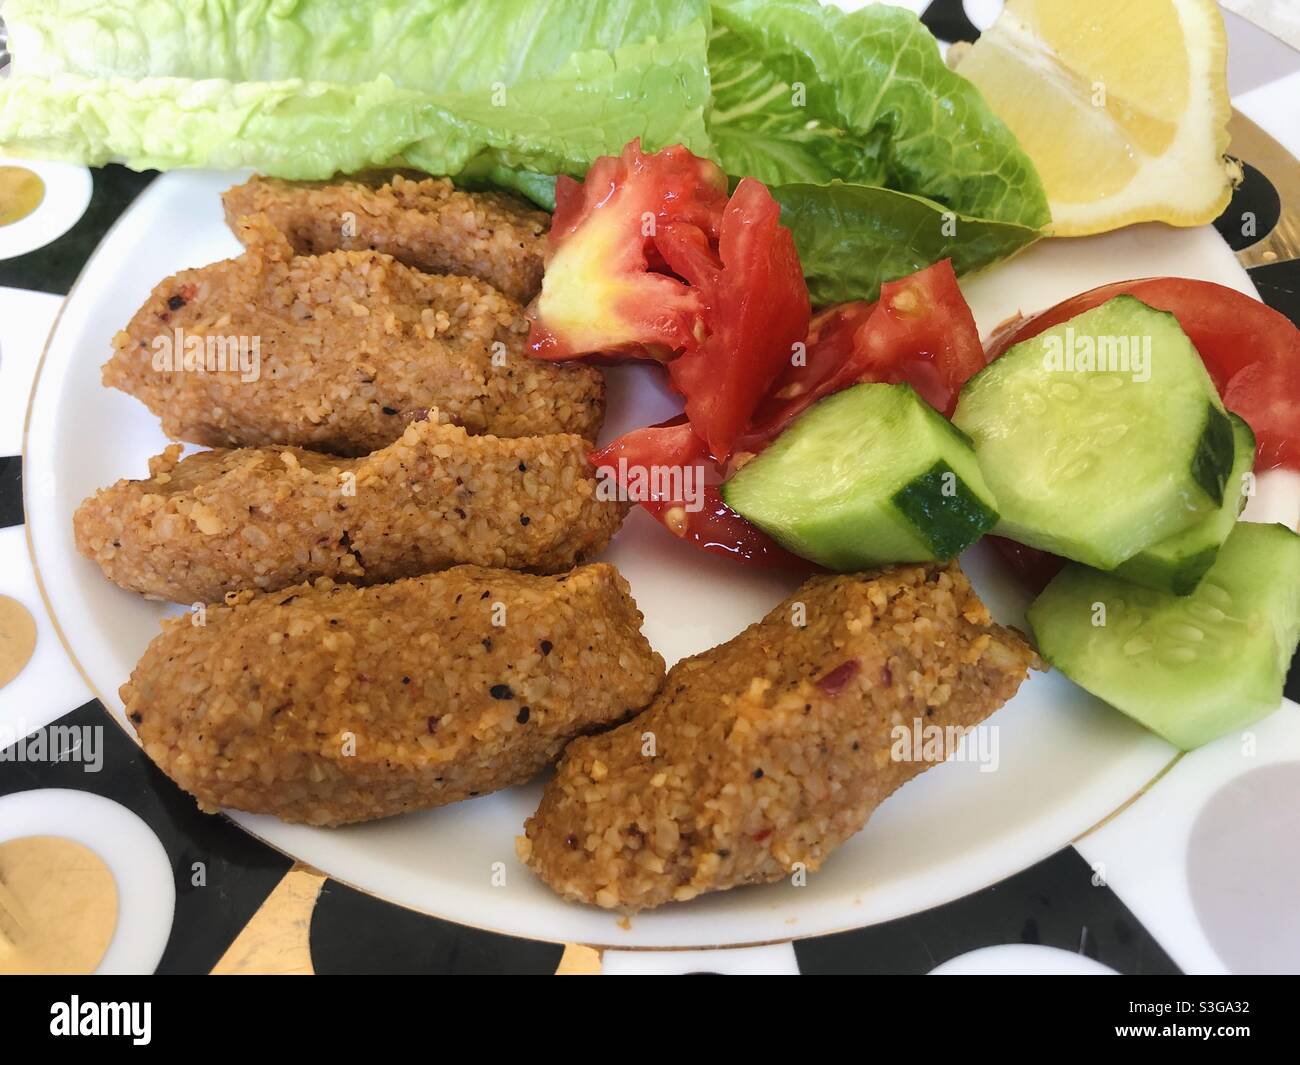 Turkish vegan dish cig kofte served with vegetables and lettuce Stock Photo